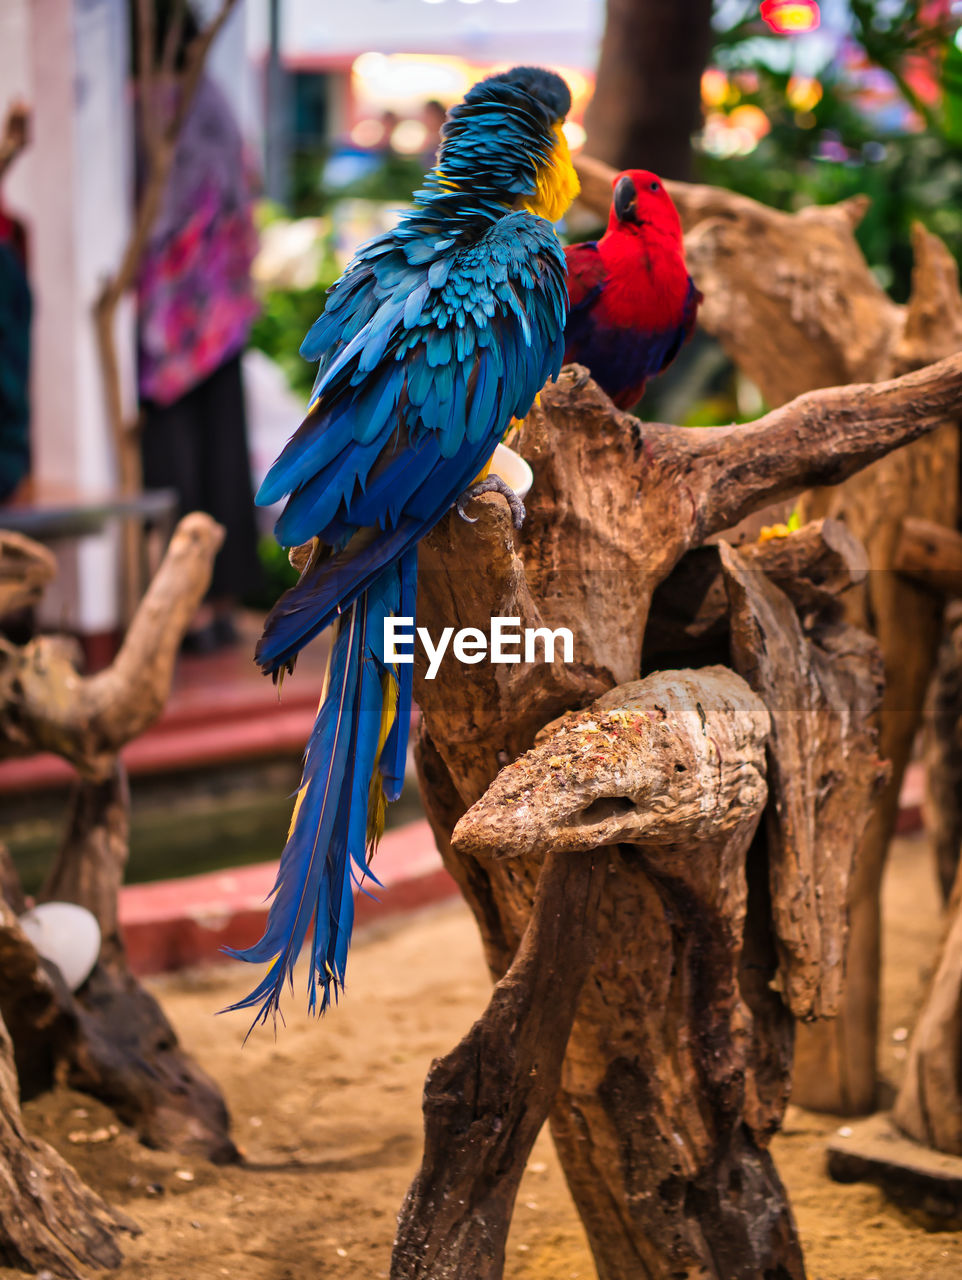 Take photos of the colorful macaw parrots with the bird care staff at the mall.